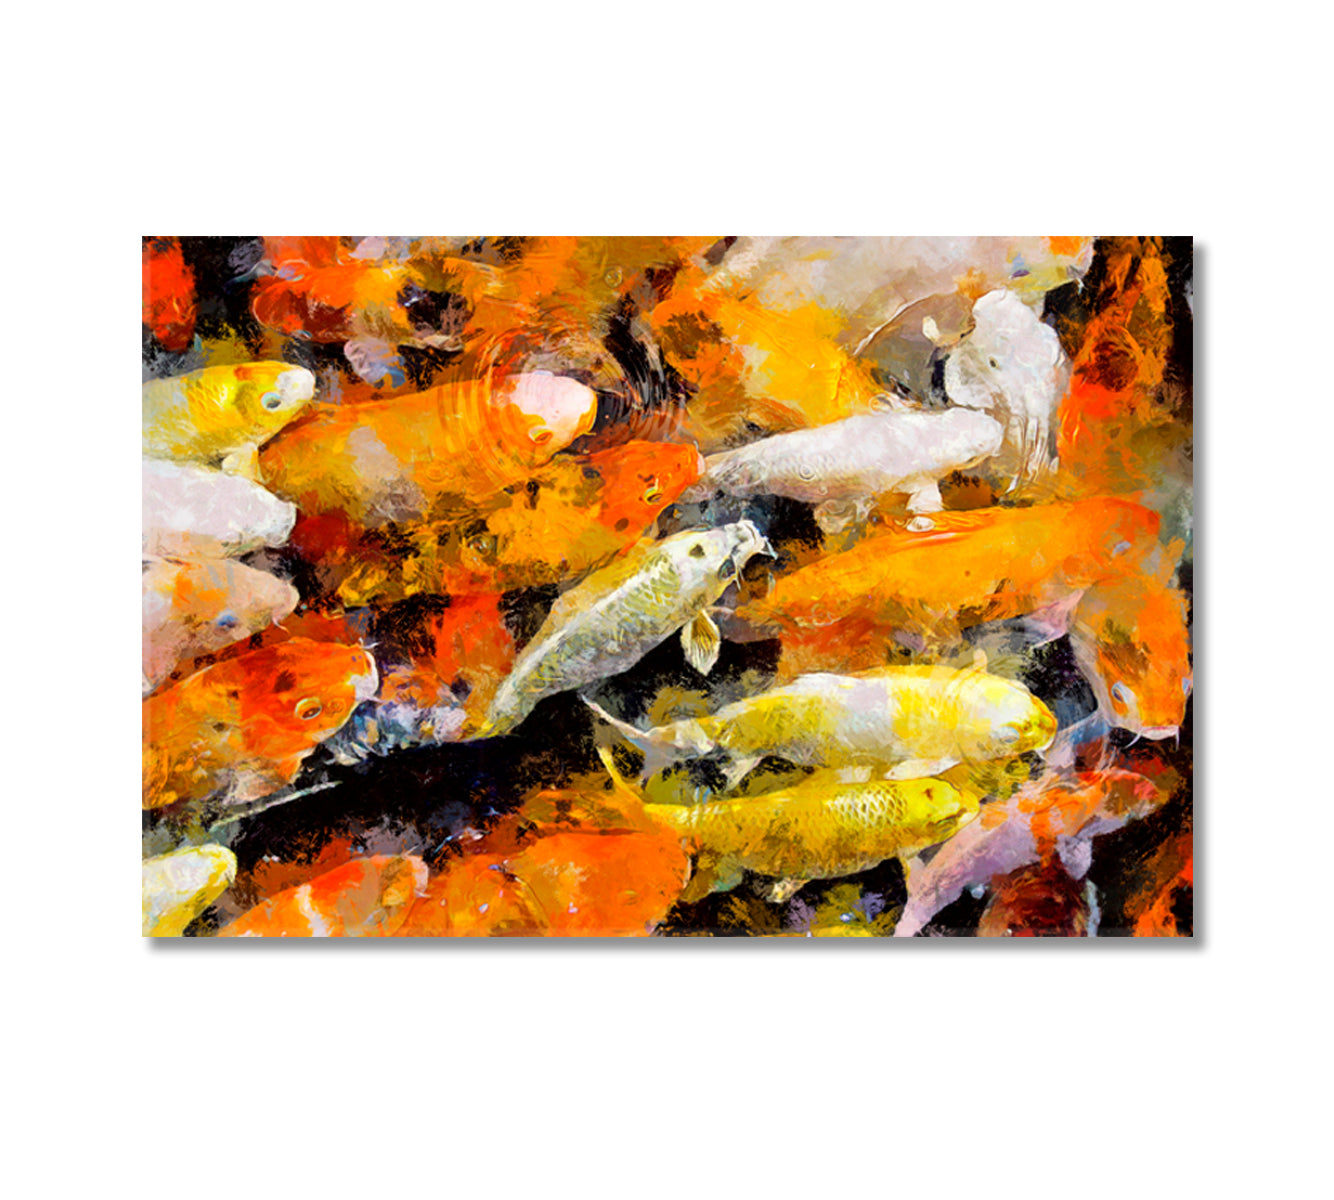 Japanese Koi Fishes Art For Home-Canvas Print-CetArt-1 Panel-24x16 inches-CetArt